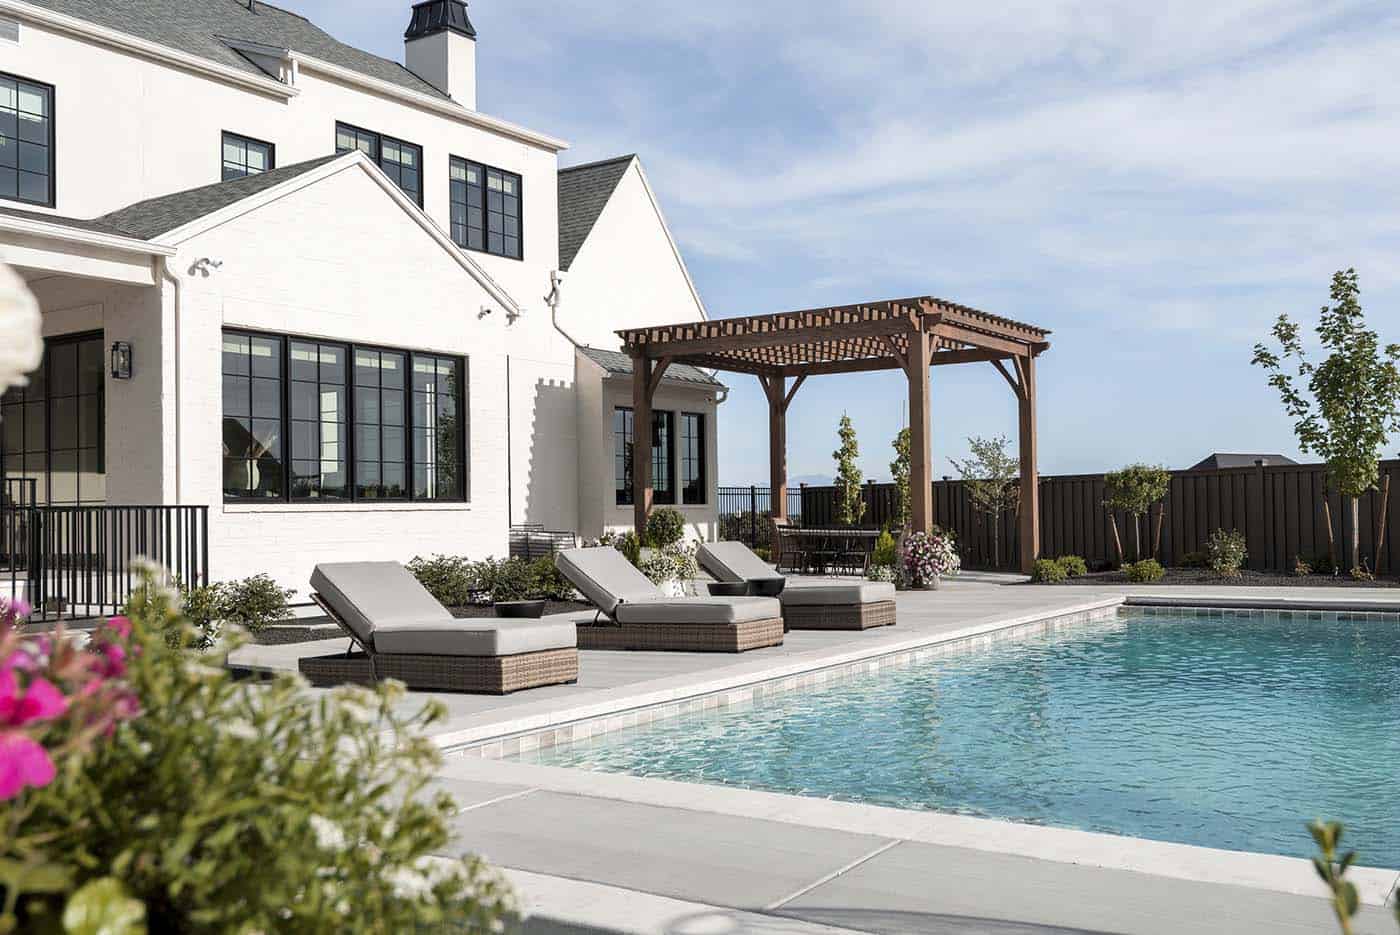 modern Tudor style home exterior with a pool